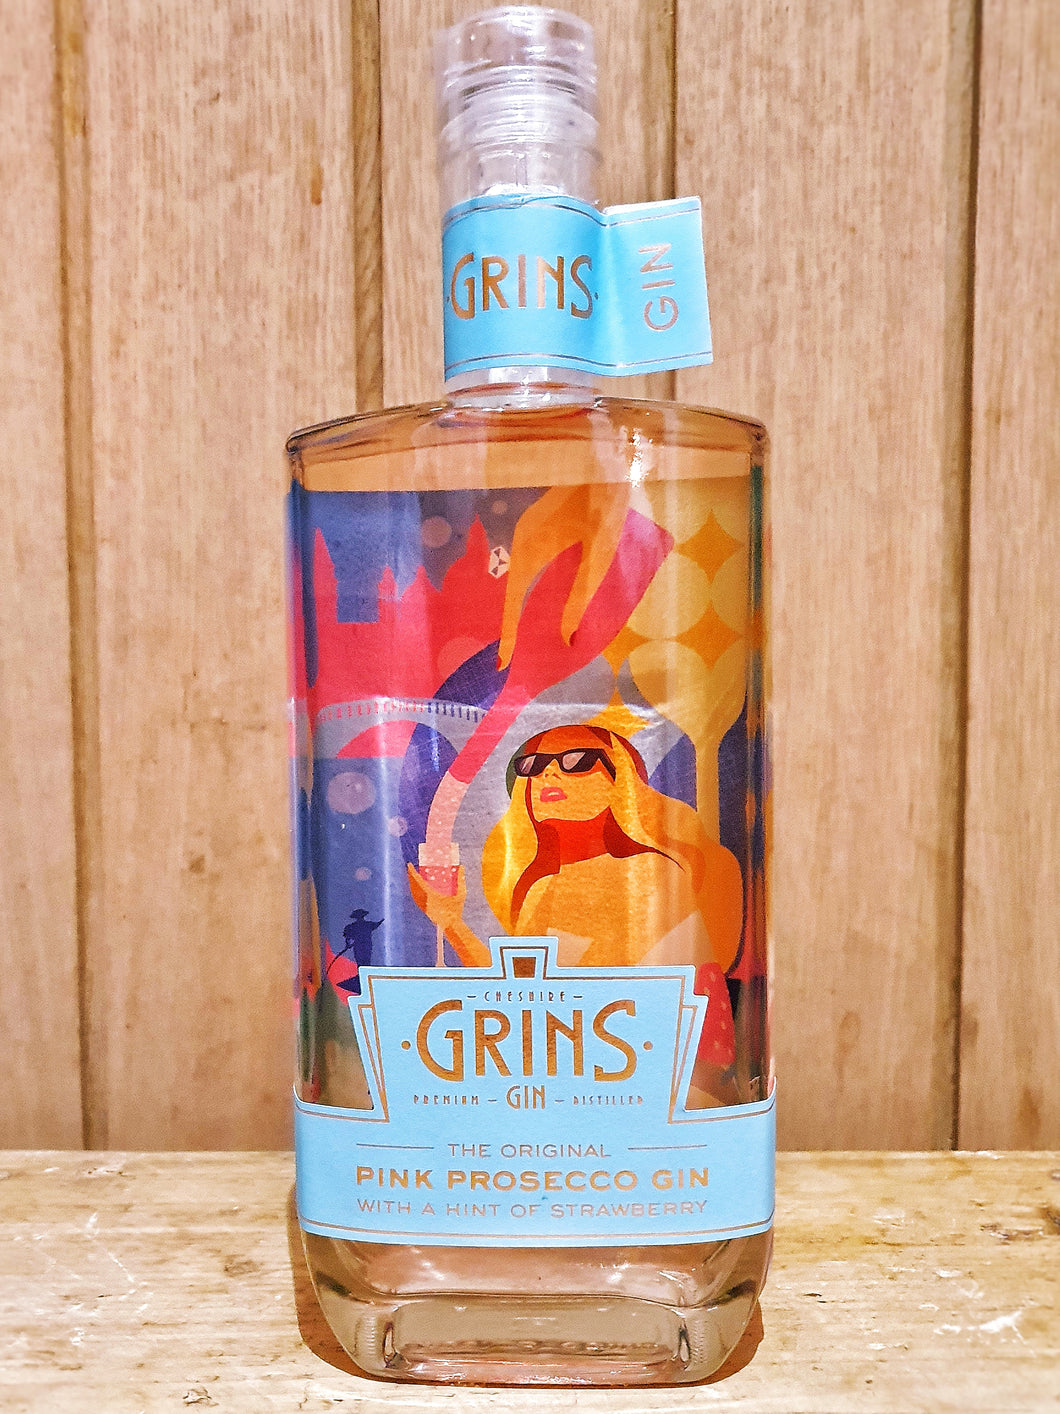 Grins Pink Prosecco Gin